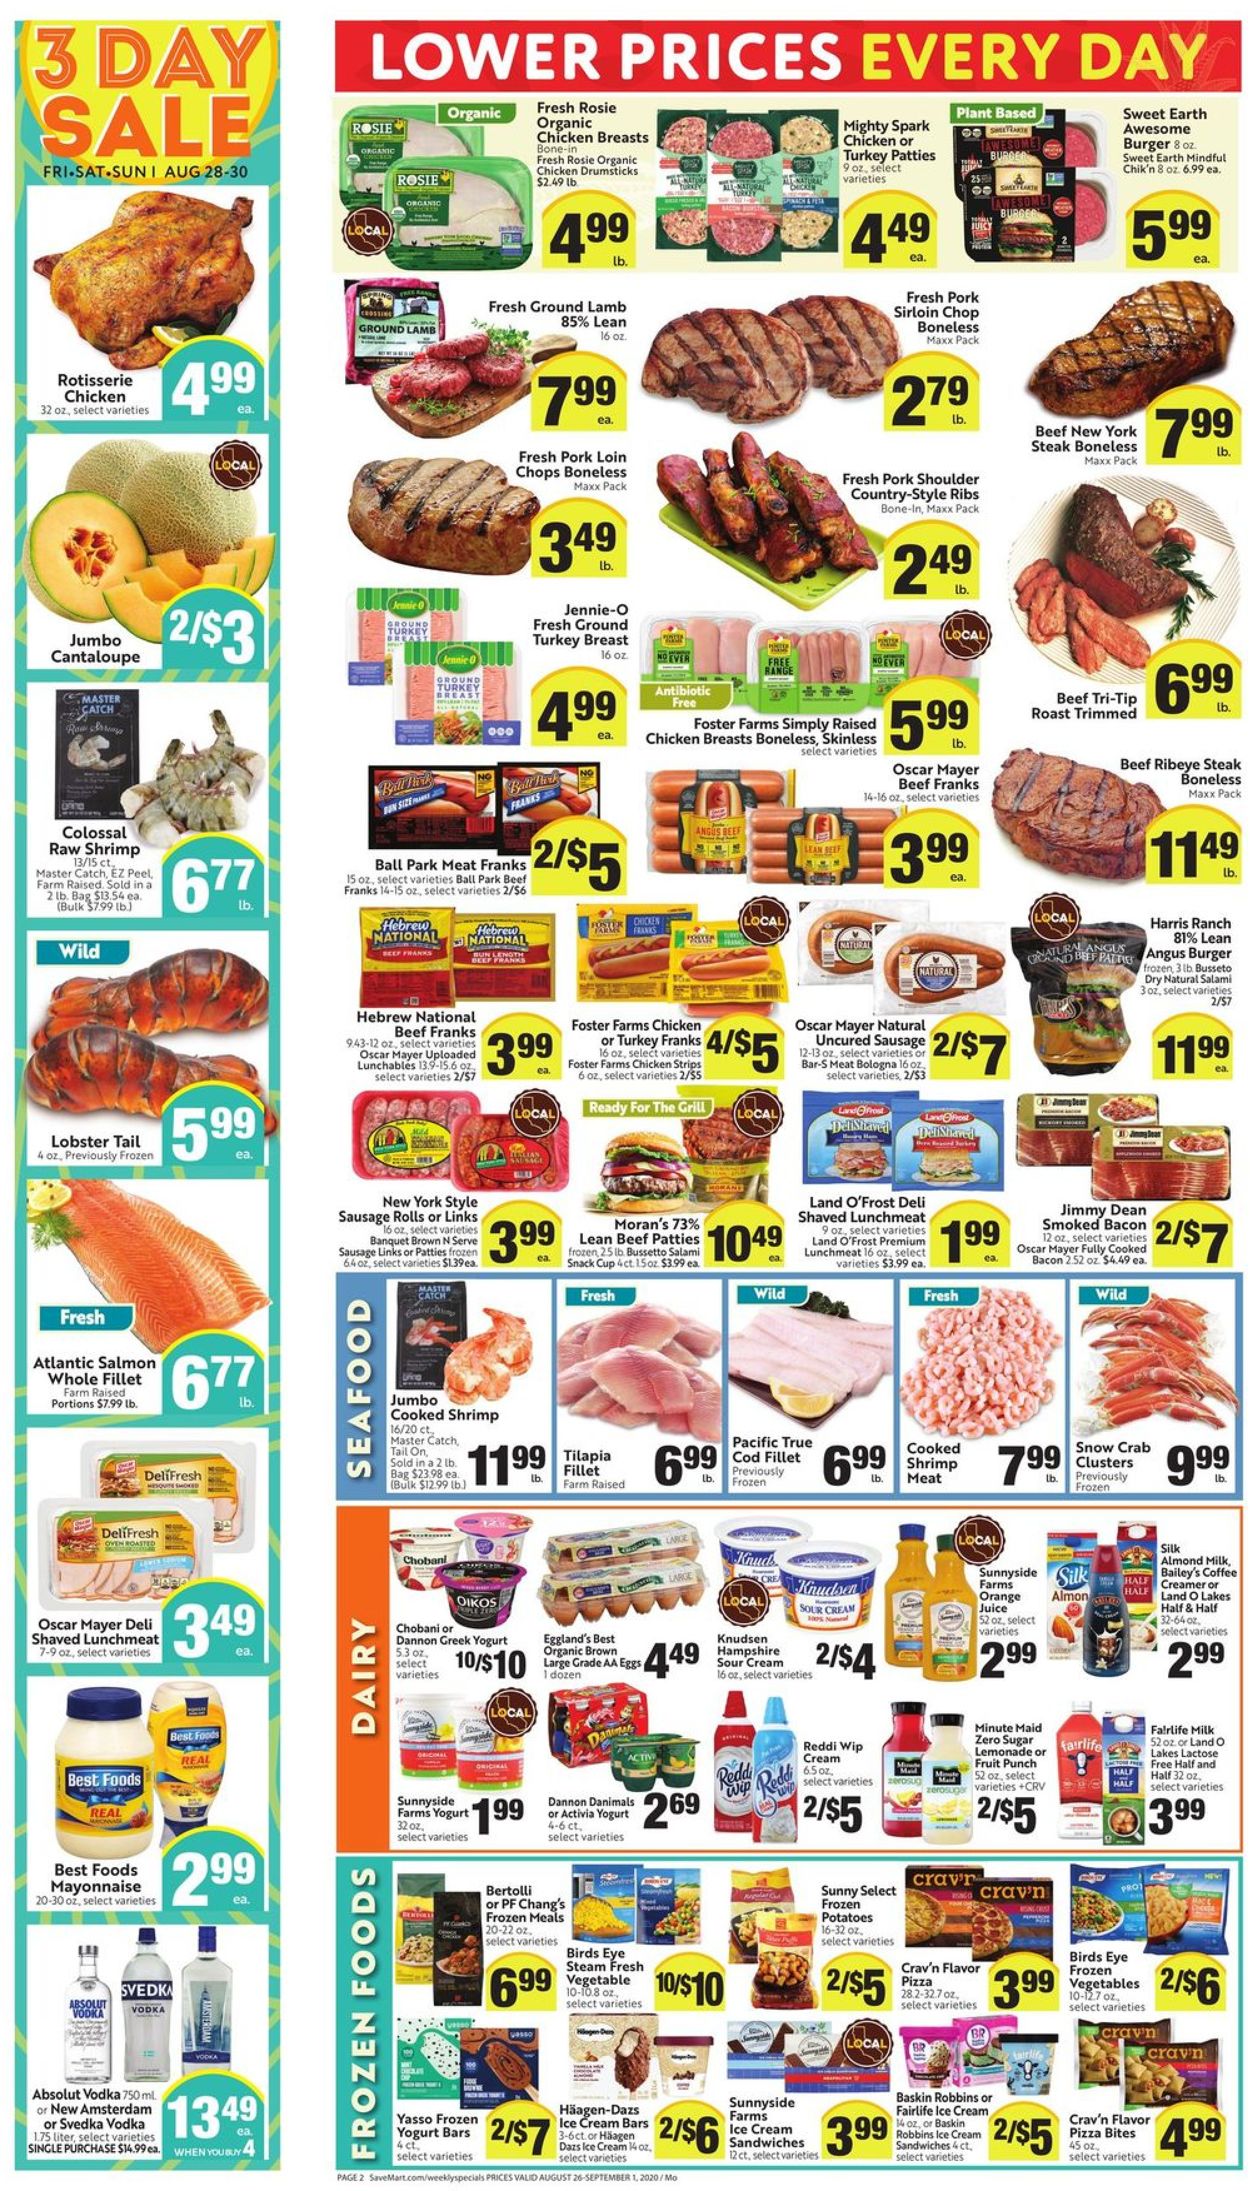 Save Mart Ad from 08/26/2020